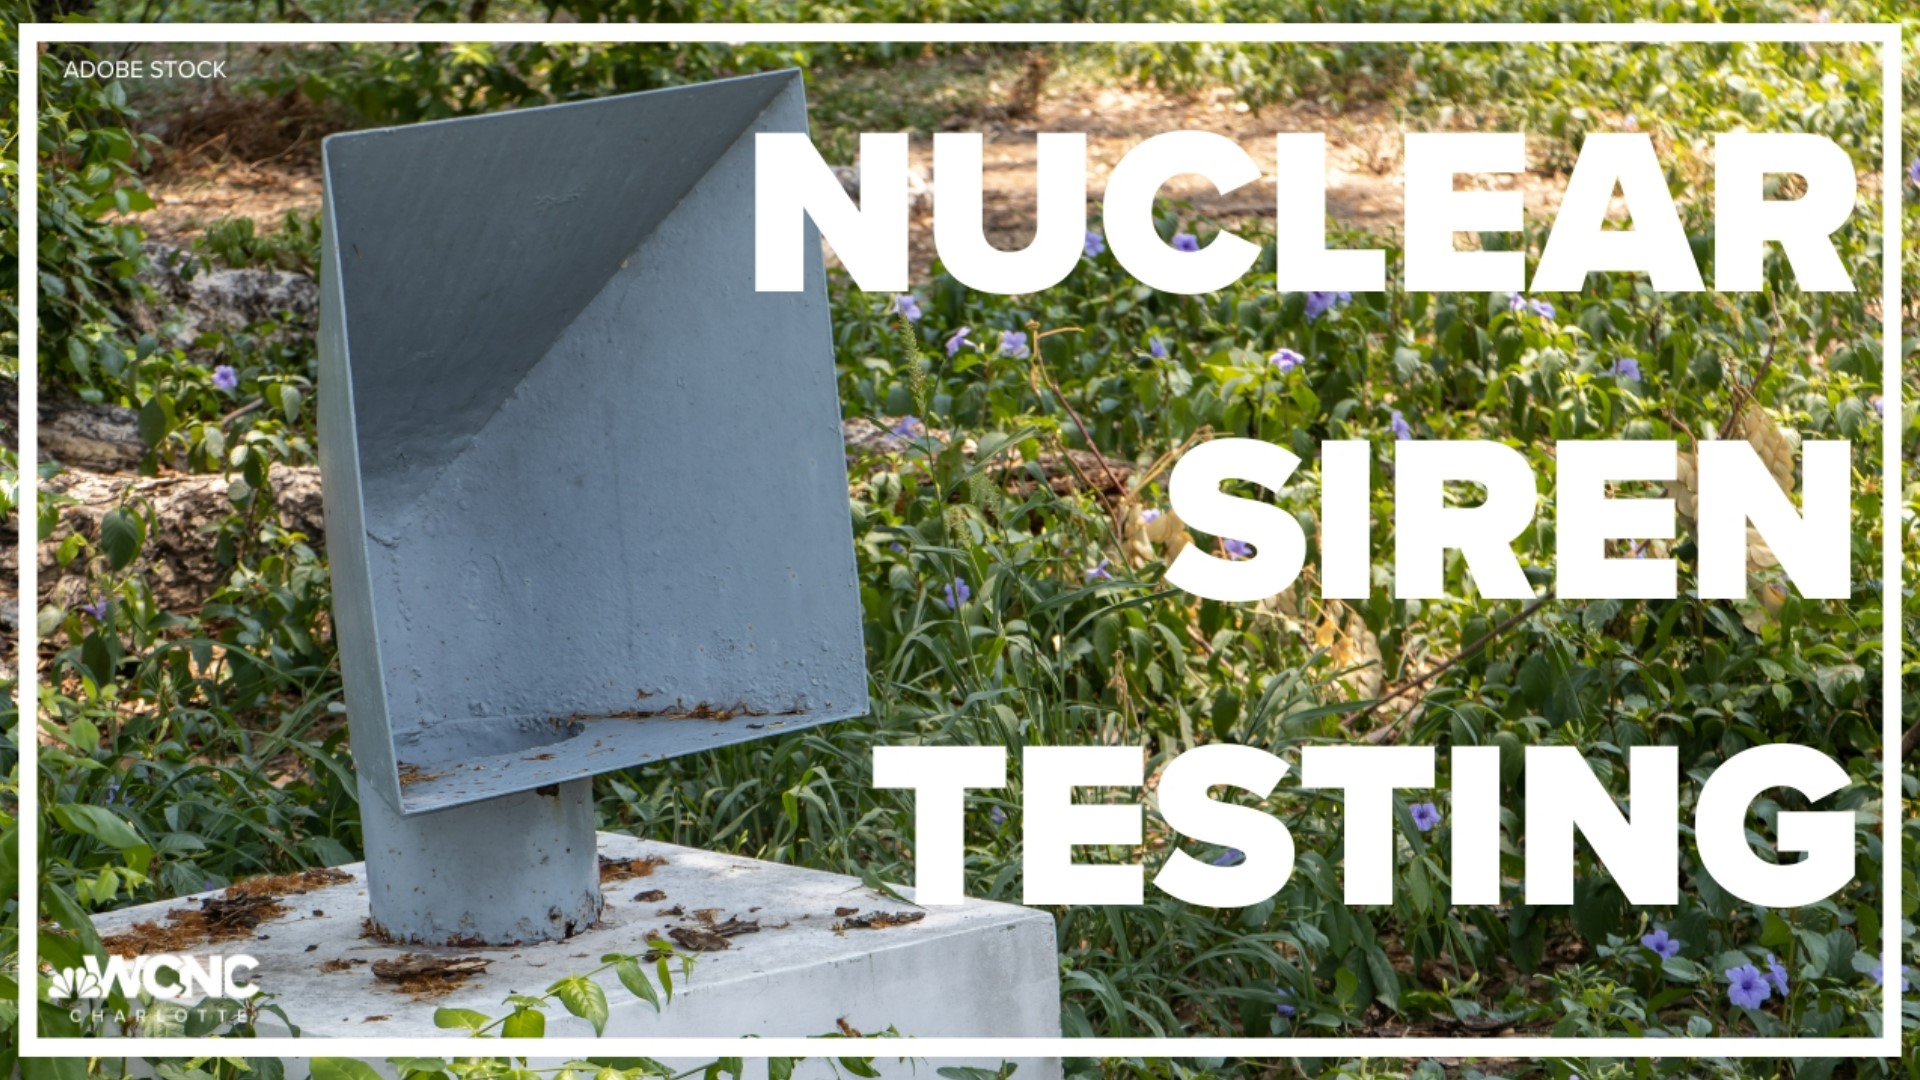 Nuclear station sirens tested on Wednesday by Duke Energy